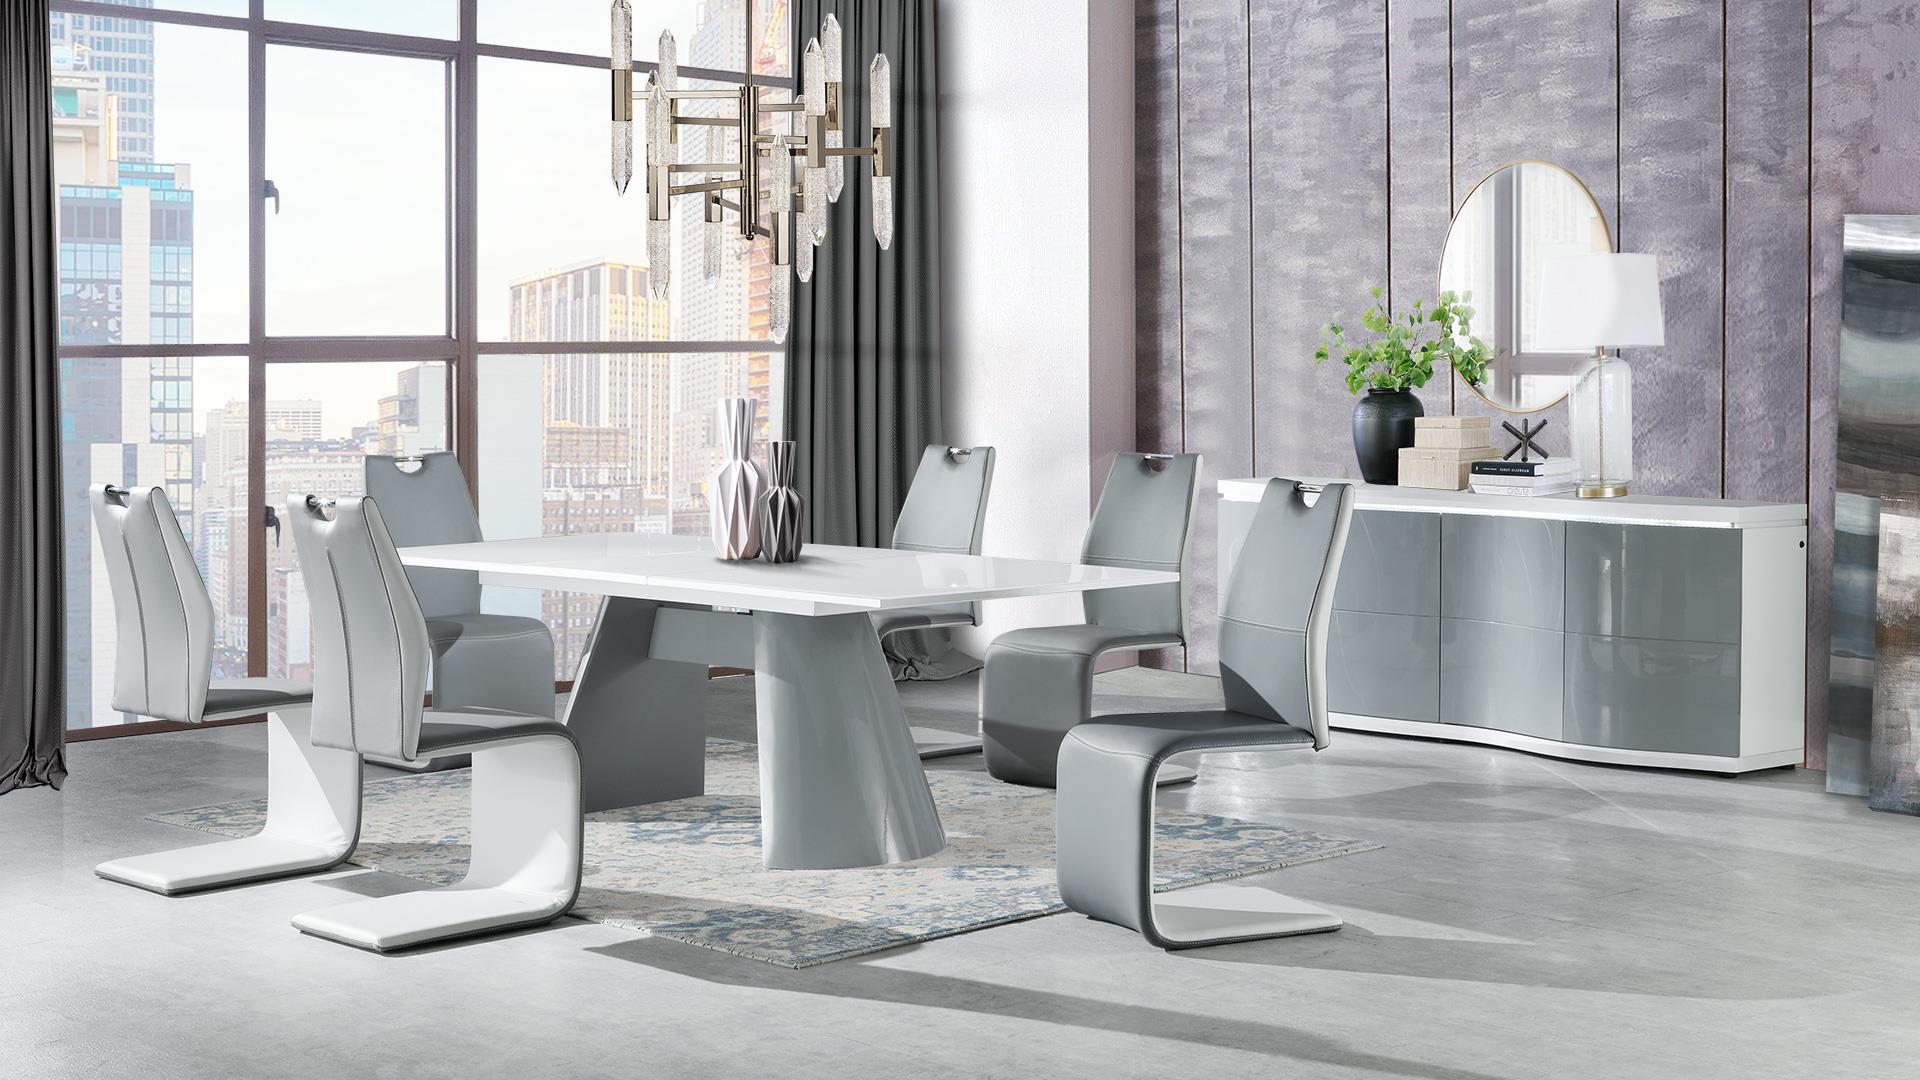 

    
BEVERLY HILLS-DT Gray & White Extension Tempered Glass Top Dining Table BEVERLY HILLS Global USA
